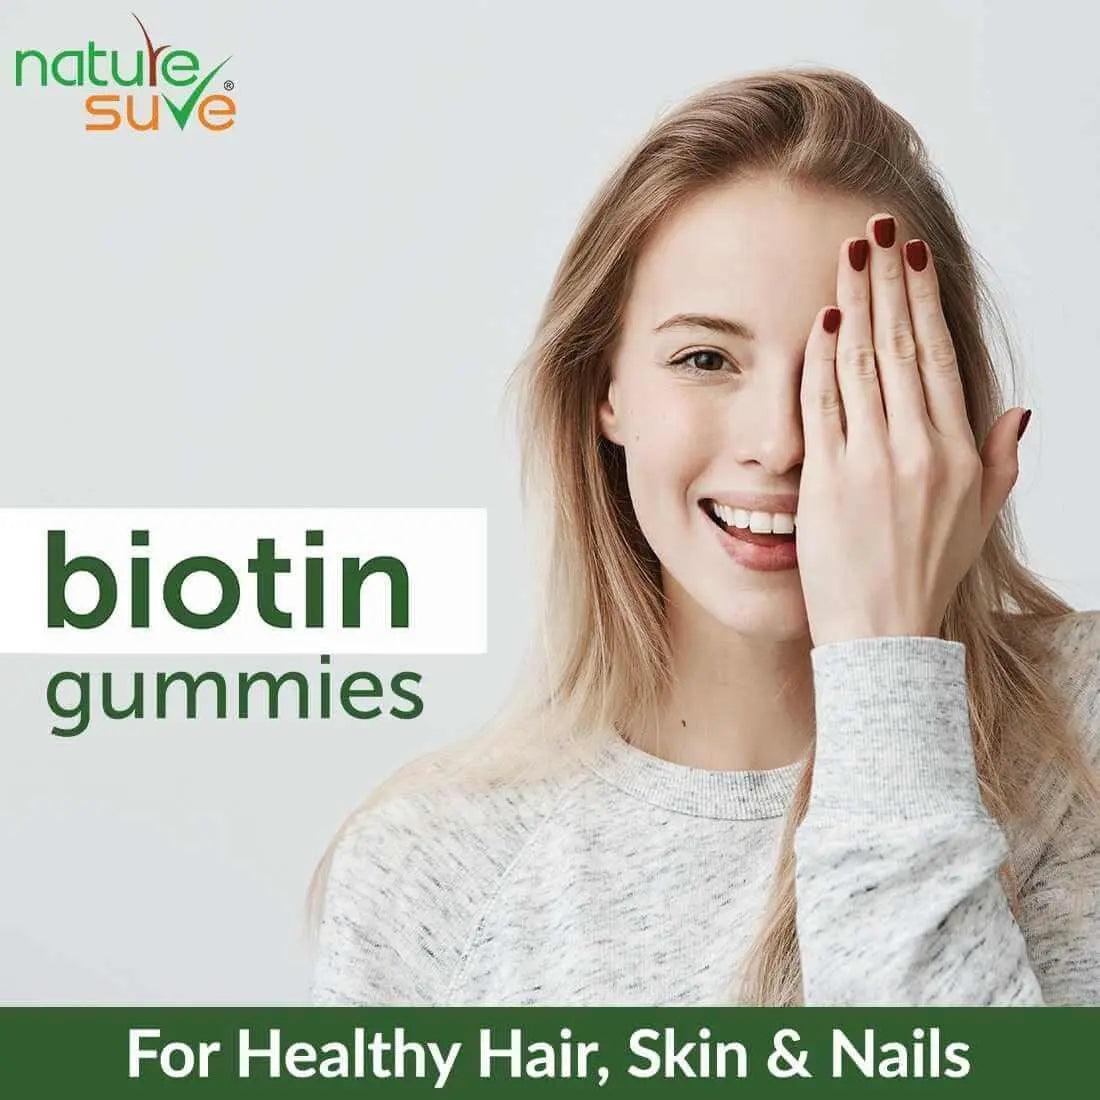 Nature Sure Biotin Gummies For Hair, Skin and Nails - 45 Pieces